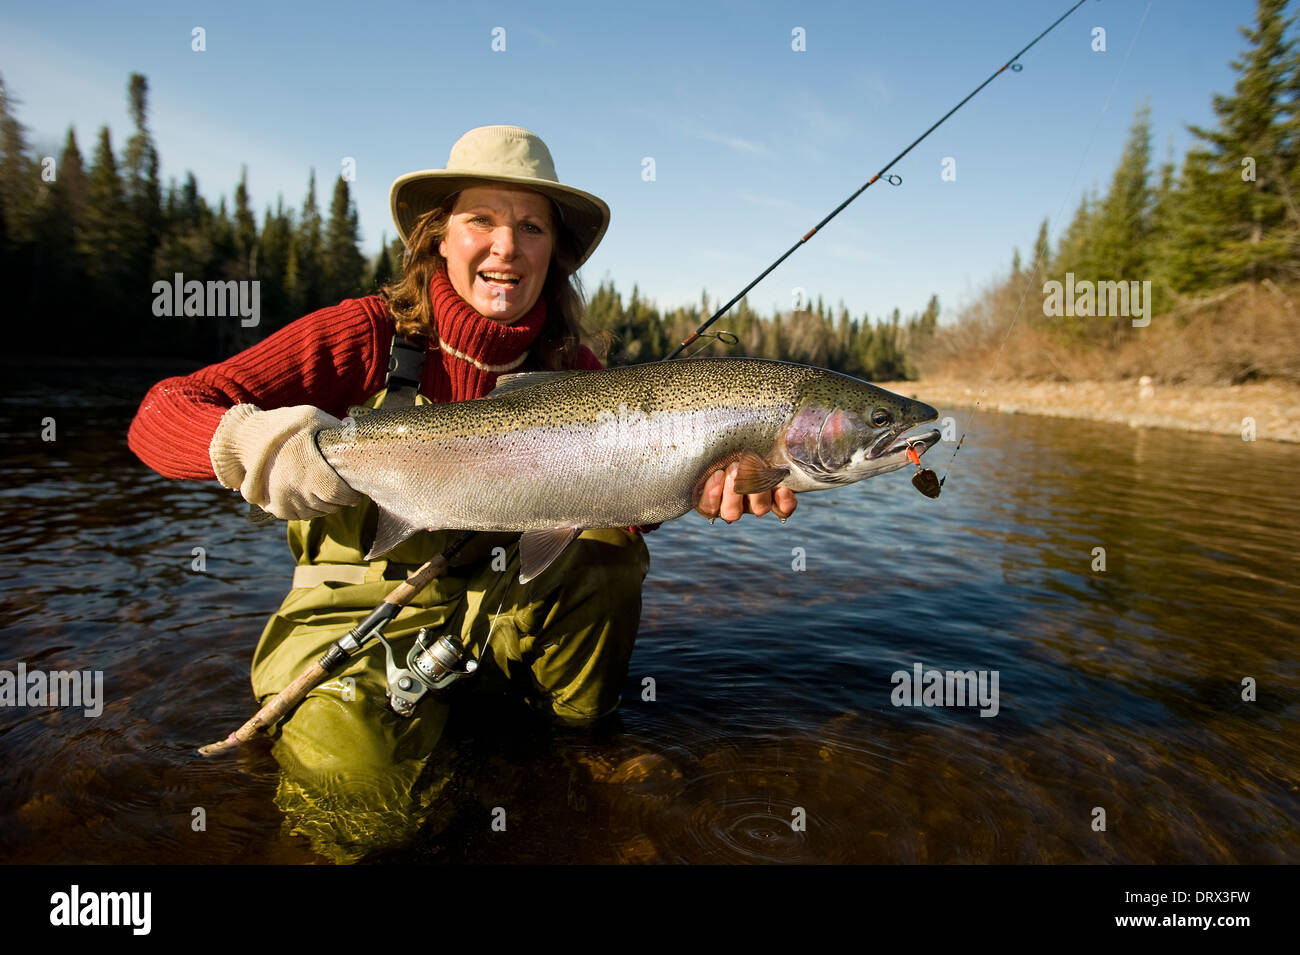 Woman angler holding a large steelhead caught in a river in Northern Ontario, Canada Stock Photo